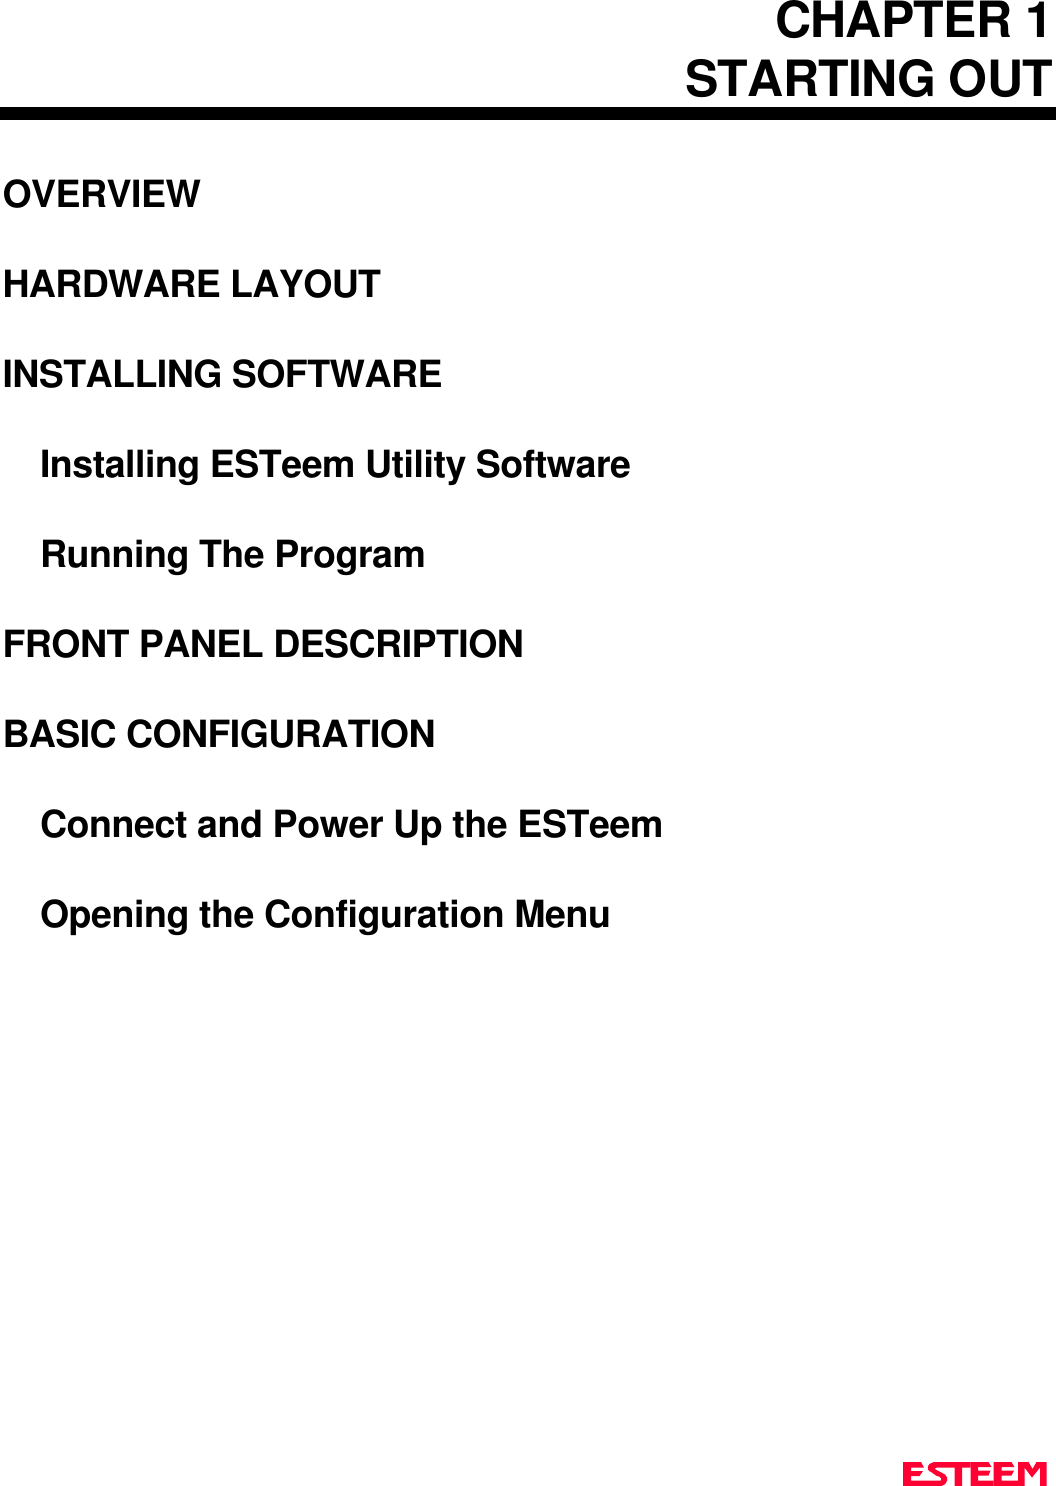 CHAPTER 1STARTING OUTOVERVIEWHARDWARE LAYOUTINSTALLING SOFTWAREInstalling ESTeem Utility SoftwareRunning The ProgramFRONT PANEL DESCRIPTIONBASIC CONFIGURATIONConnect and Power Up the ESTeemOpening the Configuration Menu